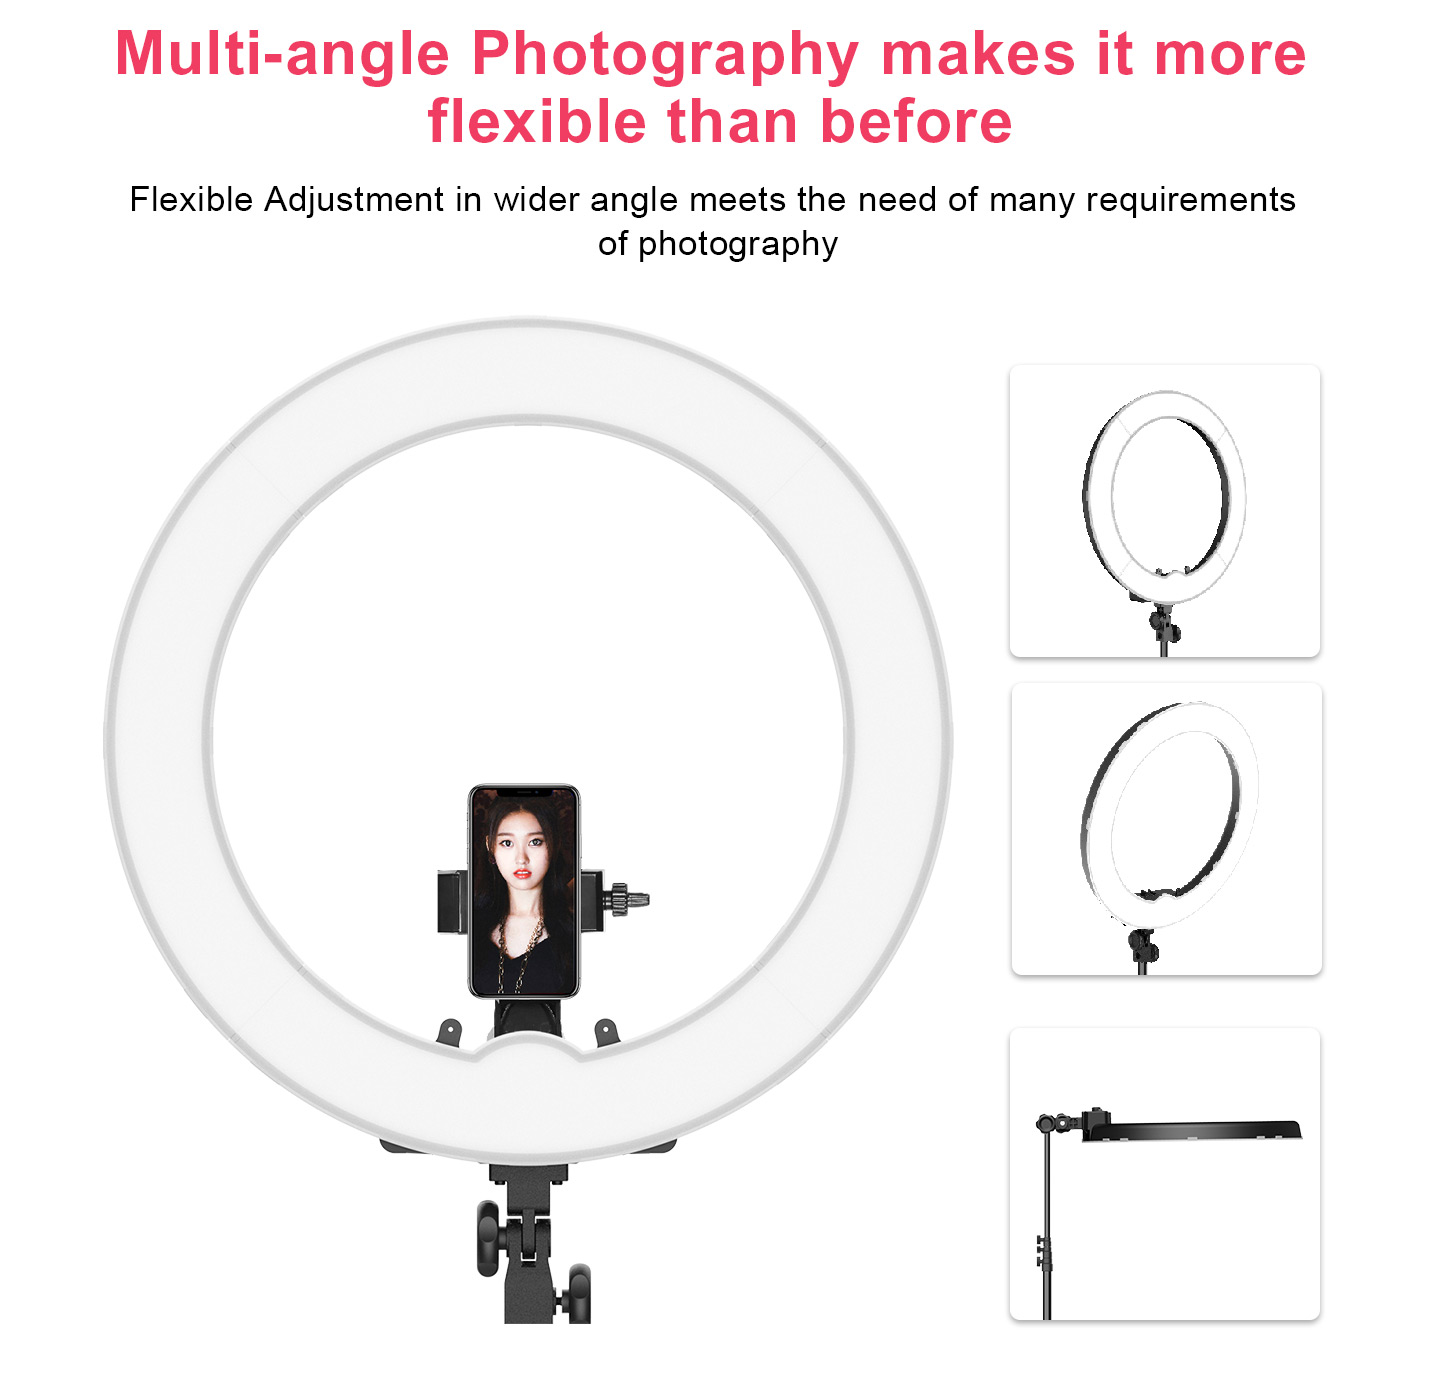 Multi-angle Photography makes it more flexible than before